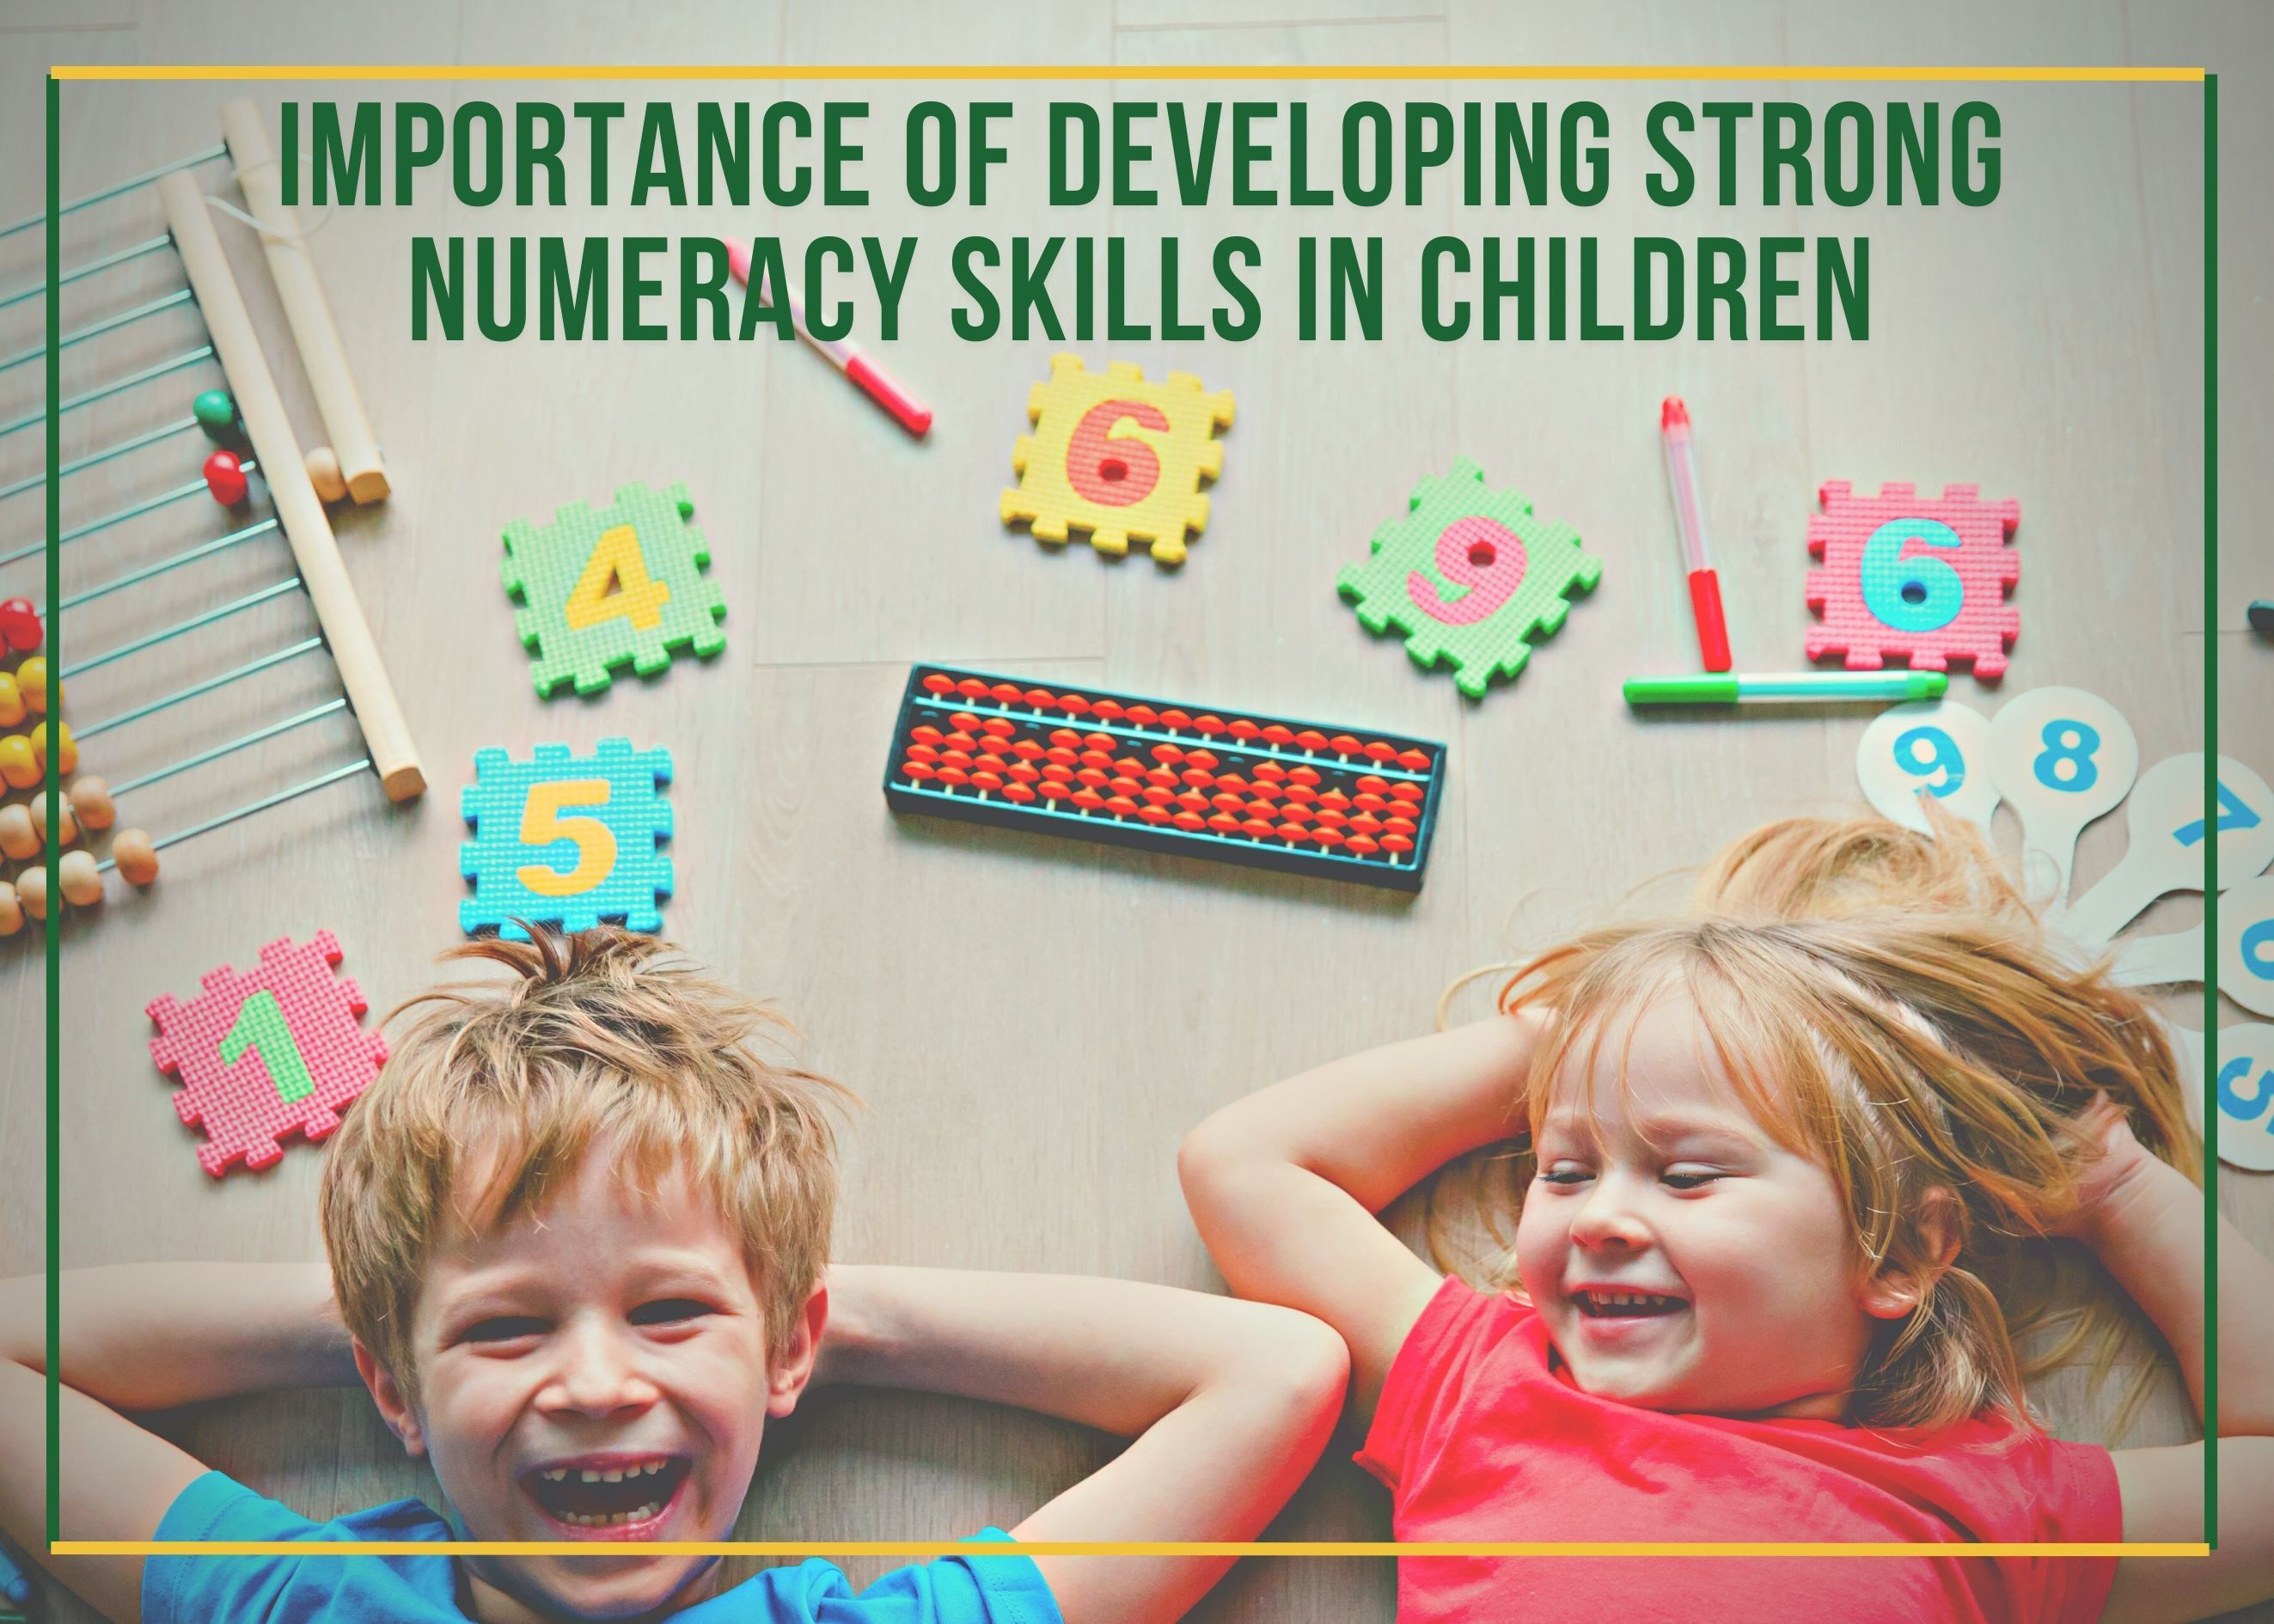 Importance of Developing Strong Numeracy Skills